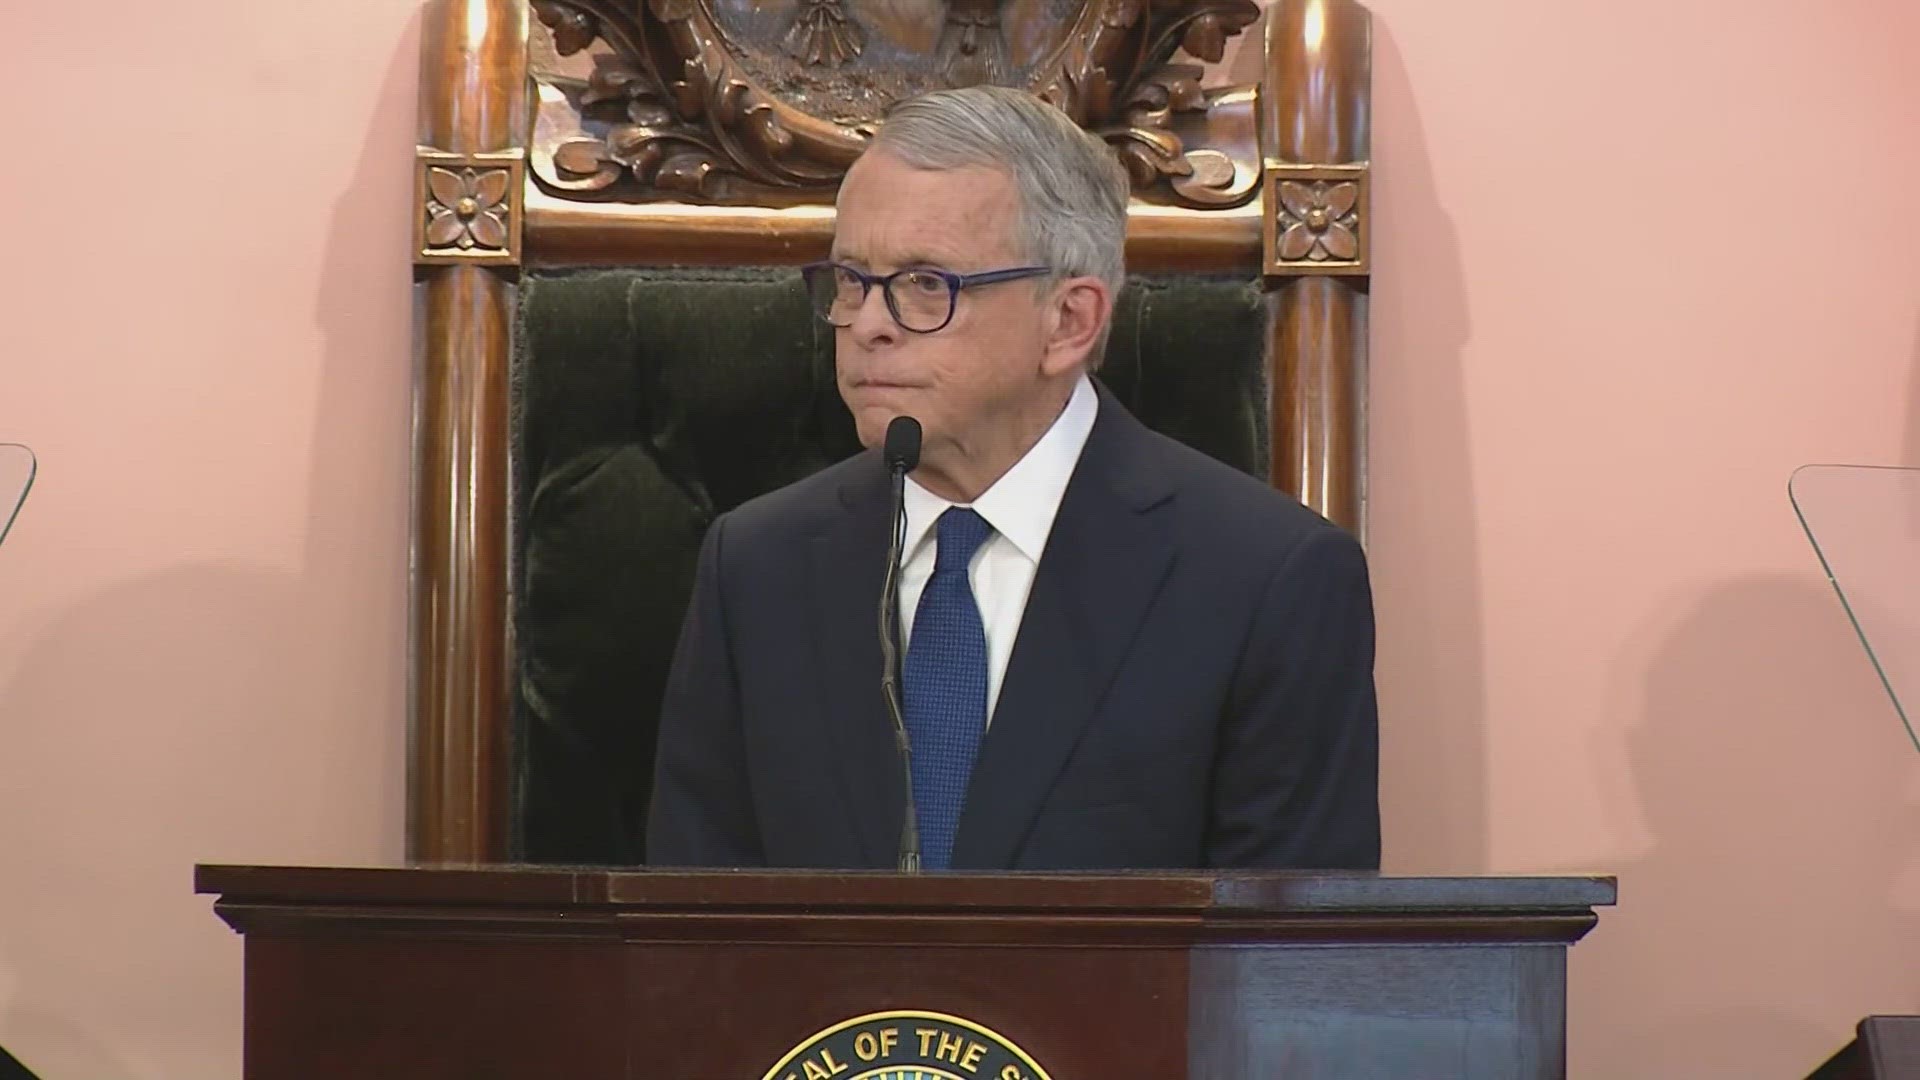 DeWine addressed a joint session of the Ohio General Assembly on Wednesday at the Ohio Statehouse.